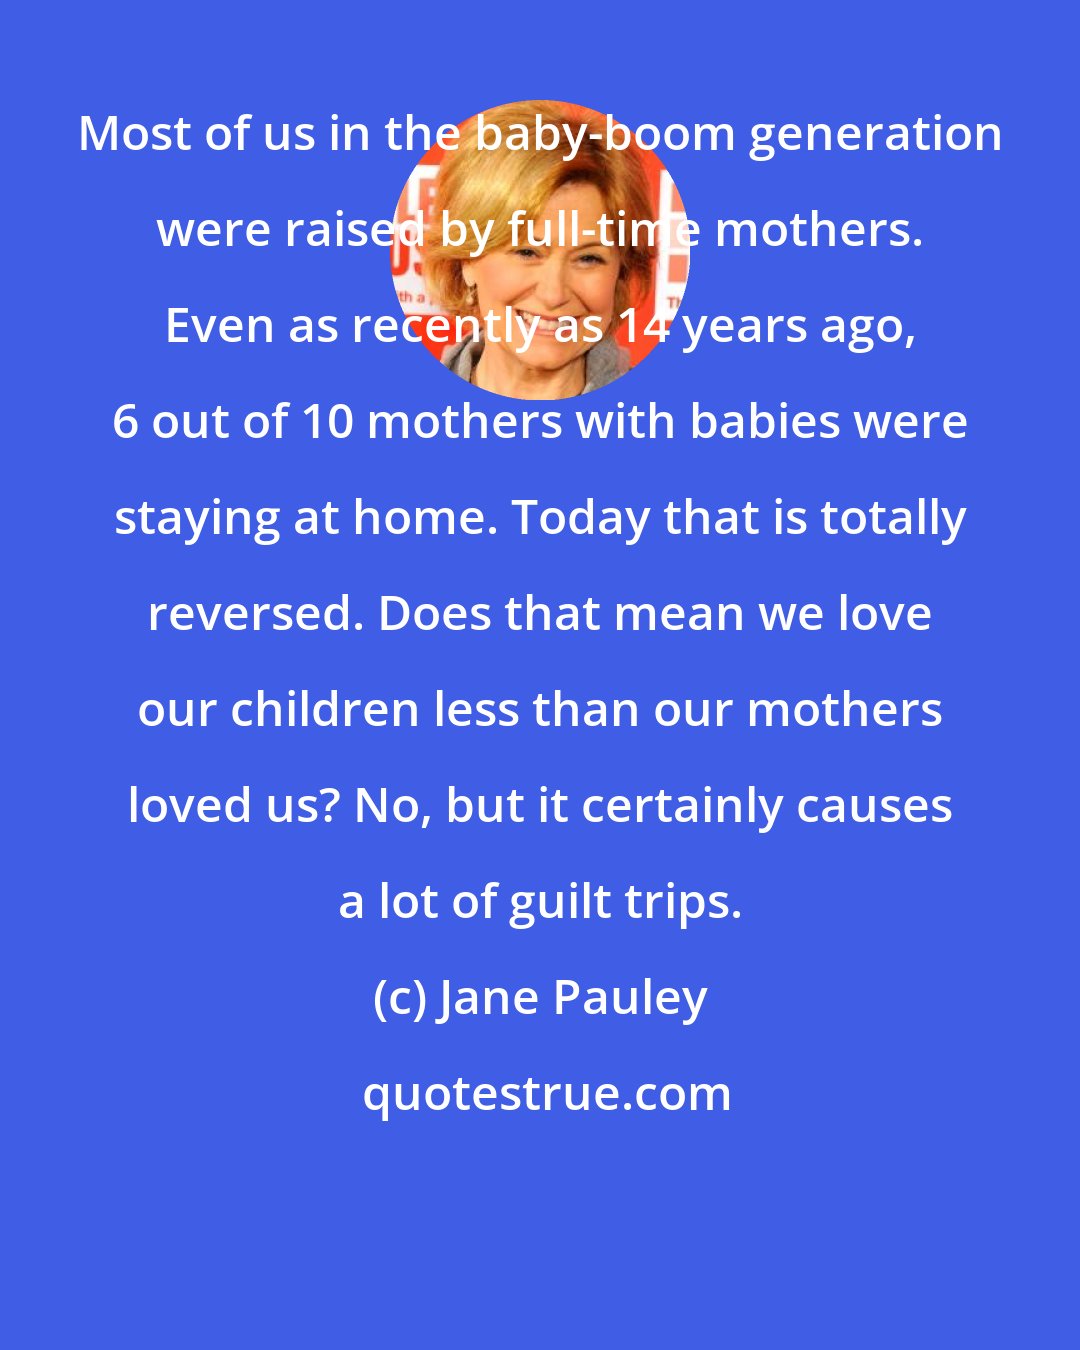 Jane Pauley: Most of us in the baby-boom generation were raised by full-time mothers. Even as recently as 14 years ago, 6 out of 10 mothers with babies were staying at home. Today that is totally reversed. Does that mean we love our children less than our mothers loved us? No, but it certainly causes a lot of guilt trips.